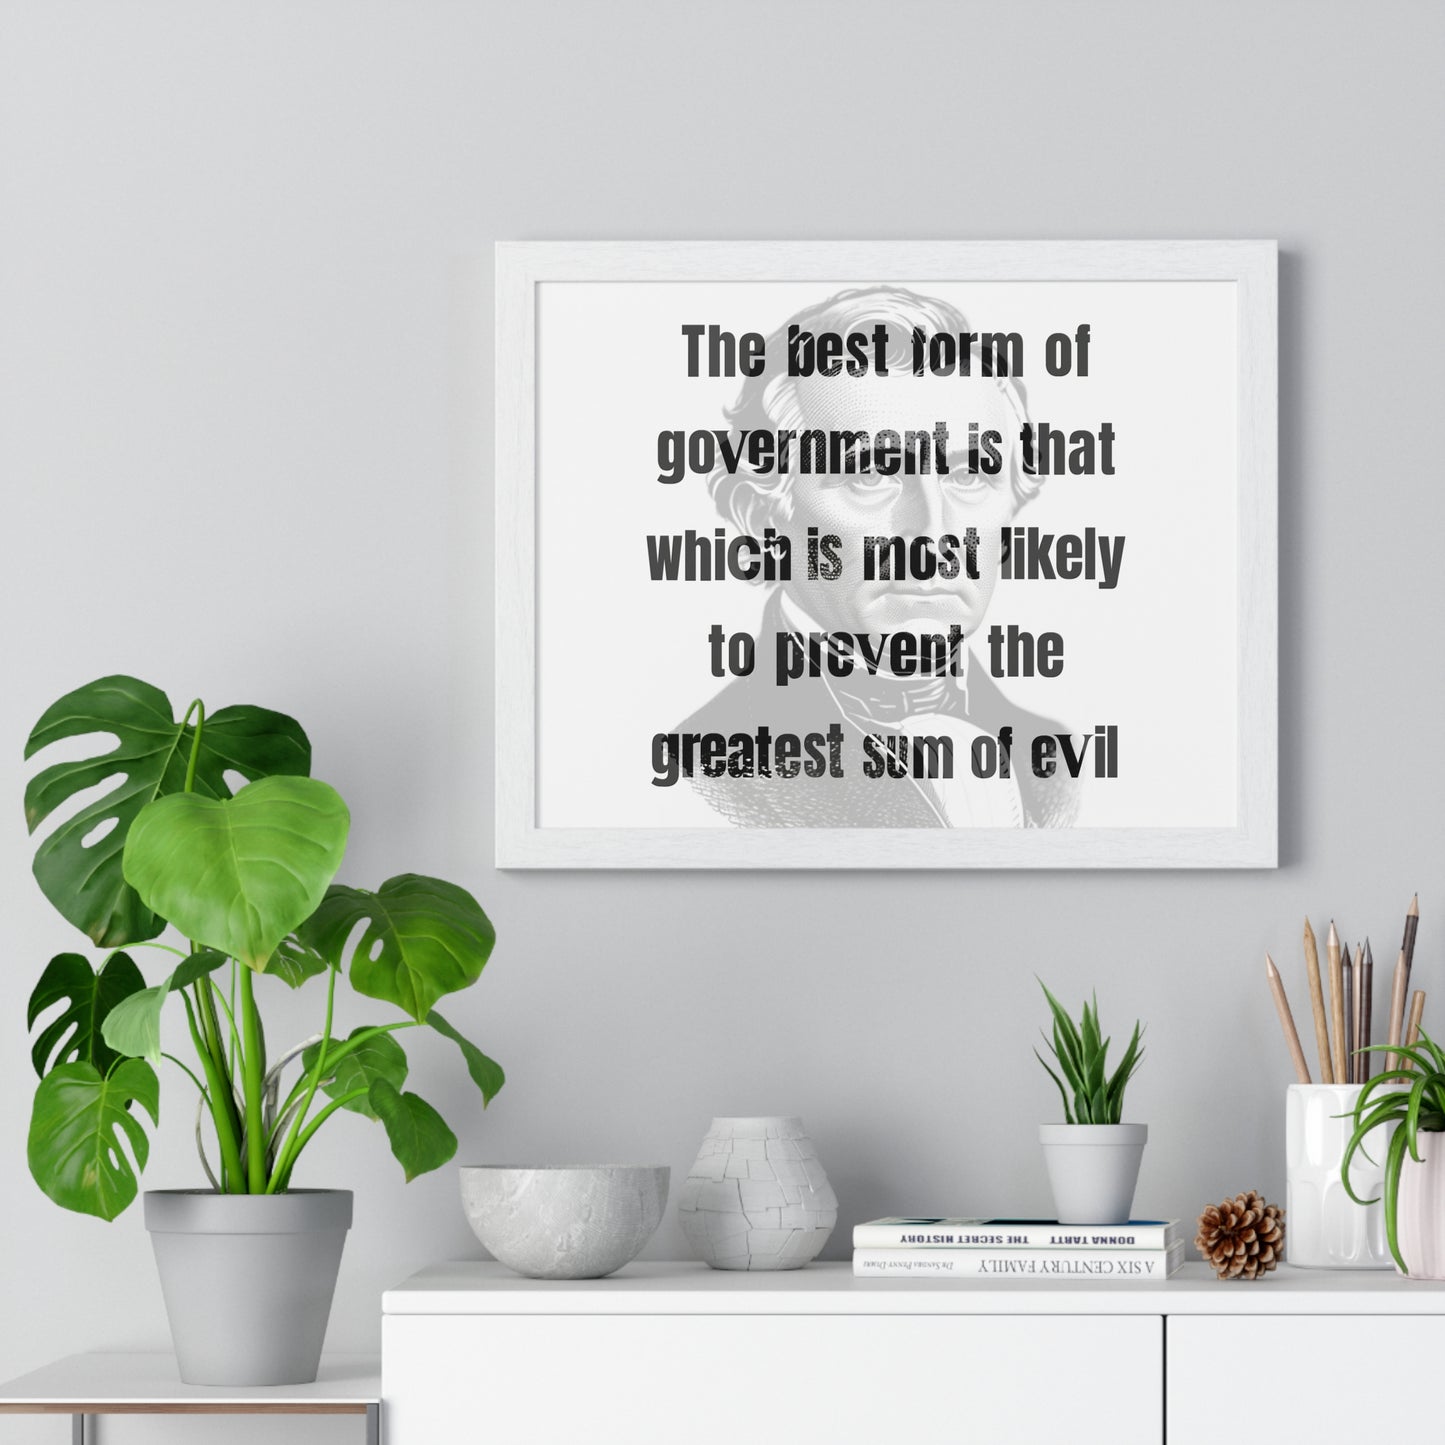 James Monroe Quote 3, Poster Art, Horizontal Light Print, 5th President of the United States, American Patriots, AI Art, Political Art, Poster Prints, Presidential Portraits, Presidential Quotes, Inspirational Quotes